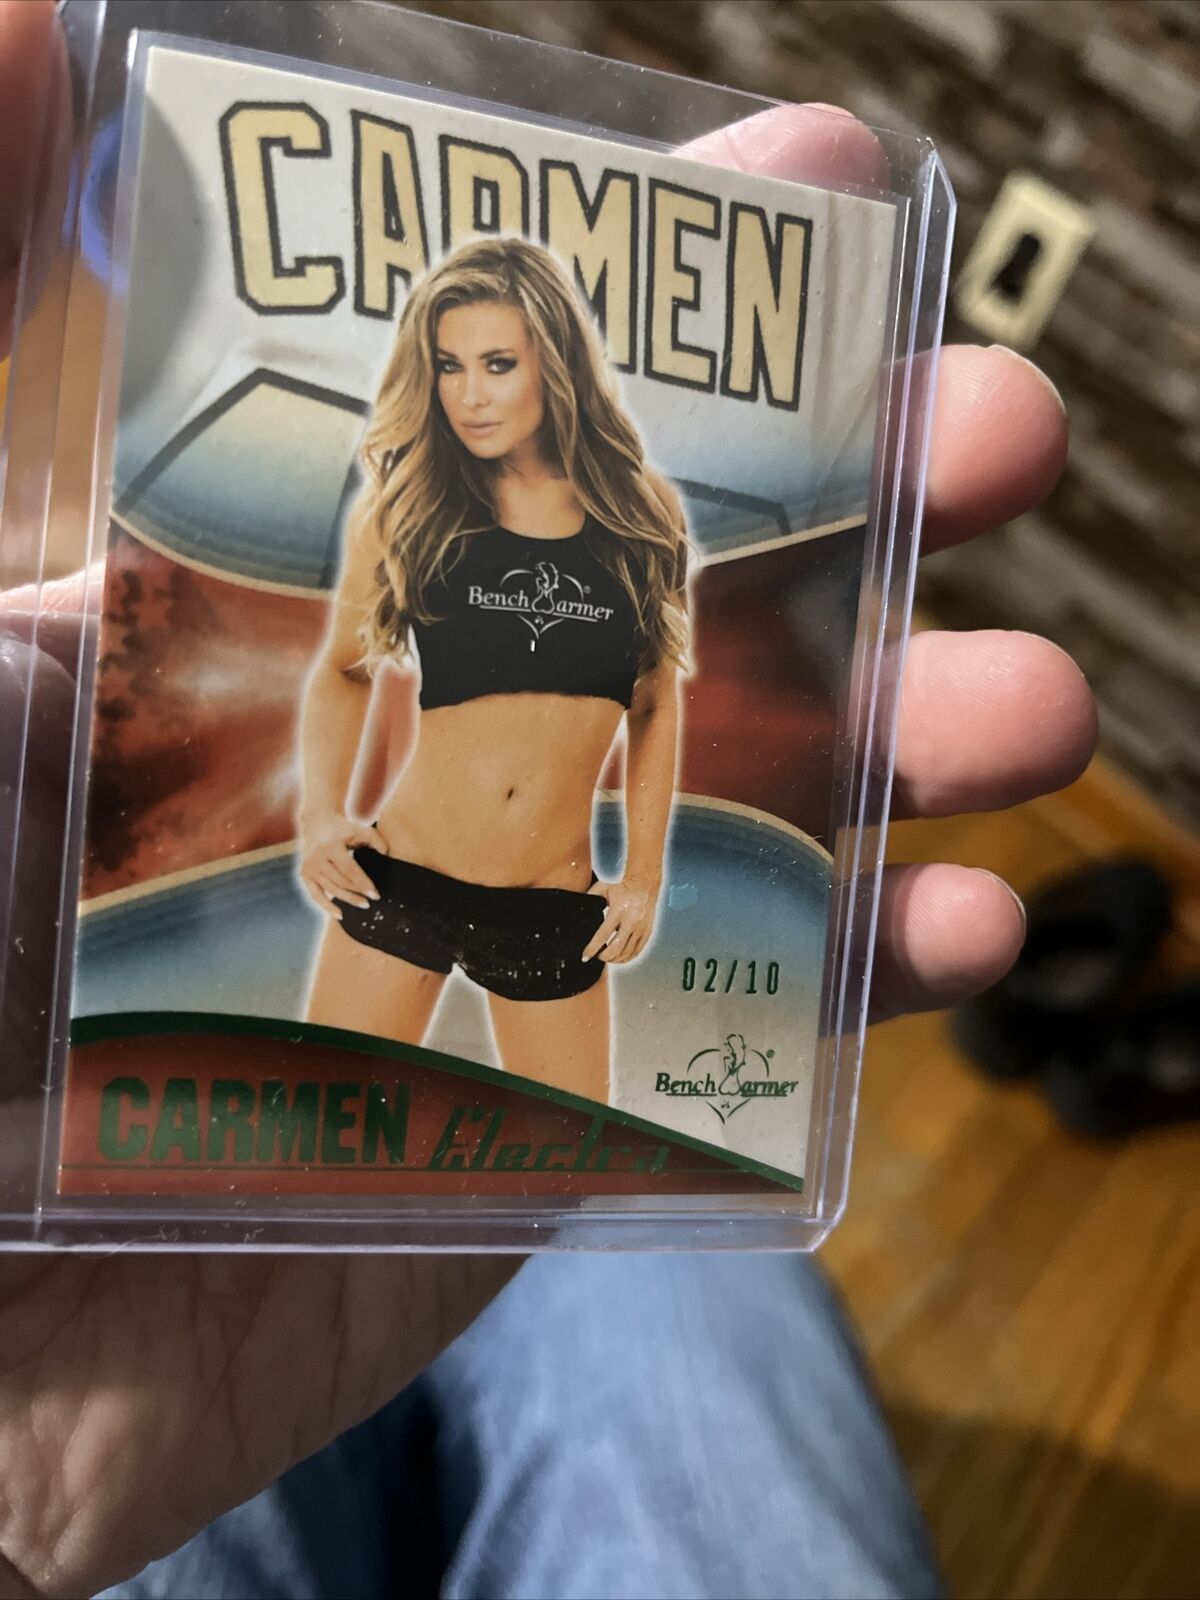 2013 Benchwarmer Carmen Electra Card #2 Out Of 10